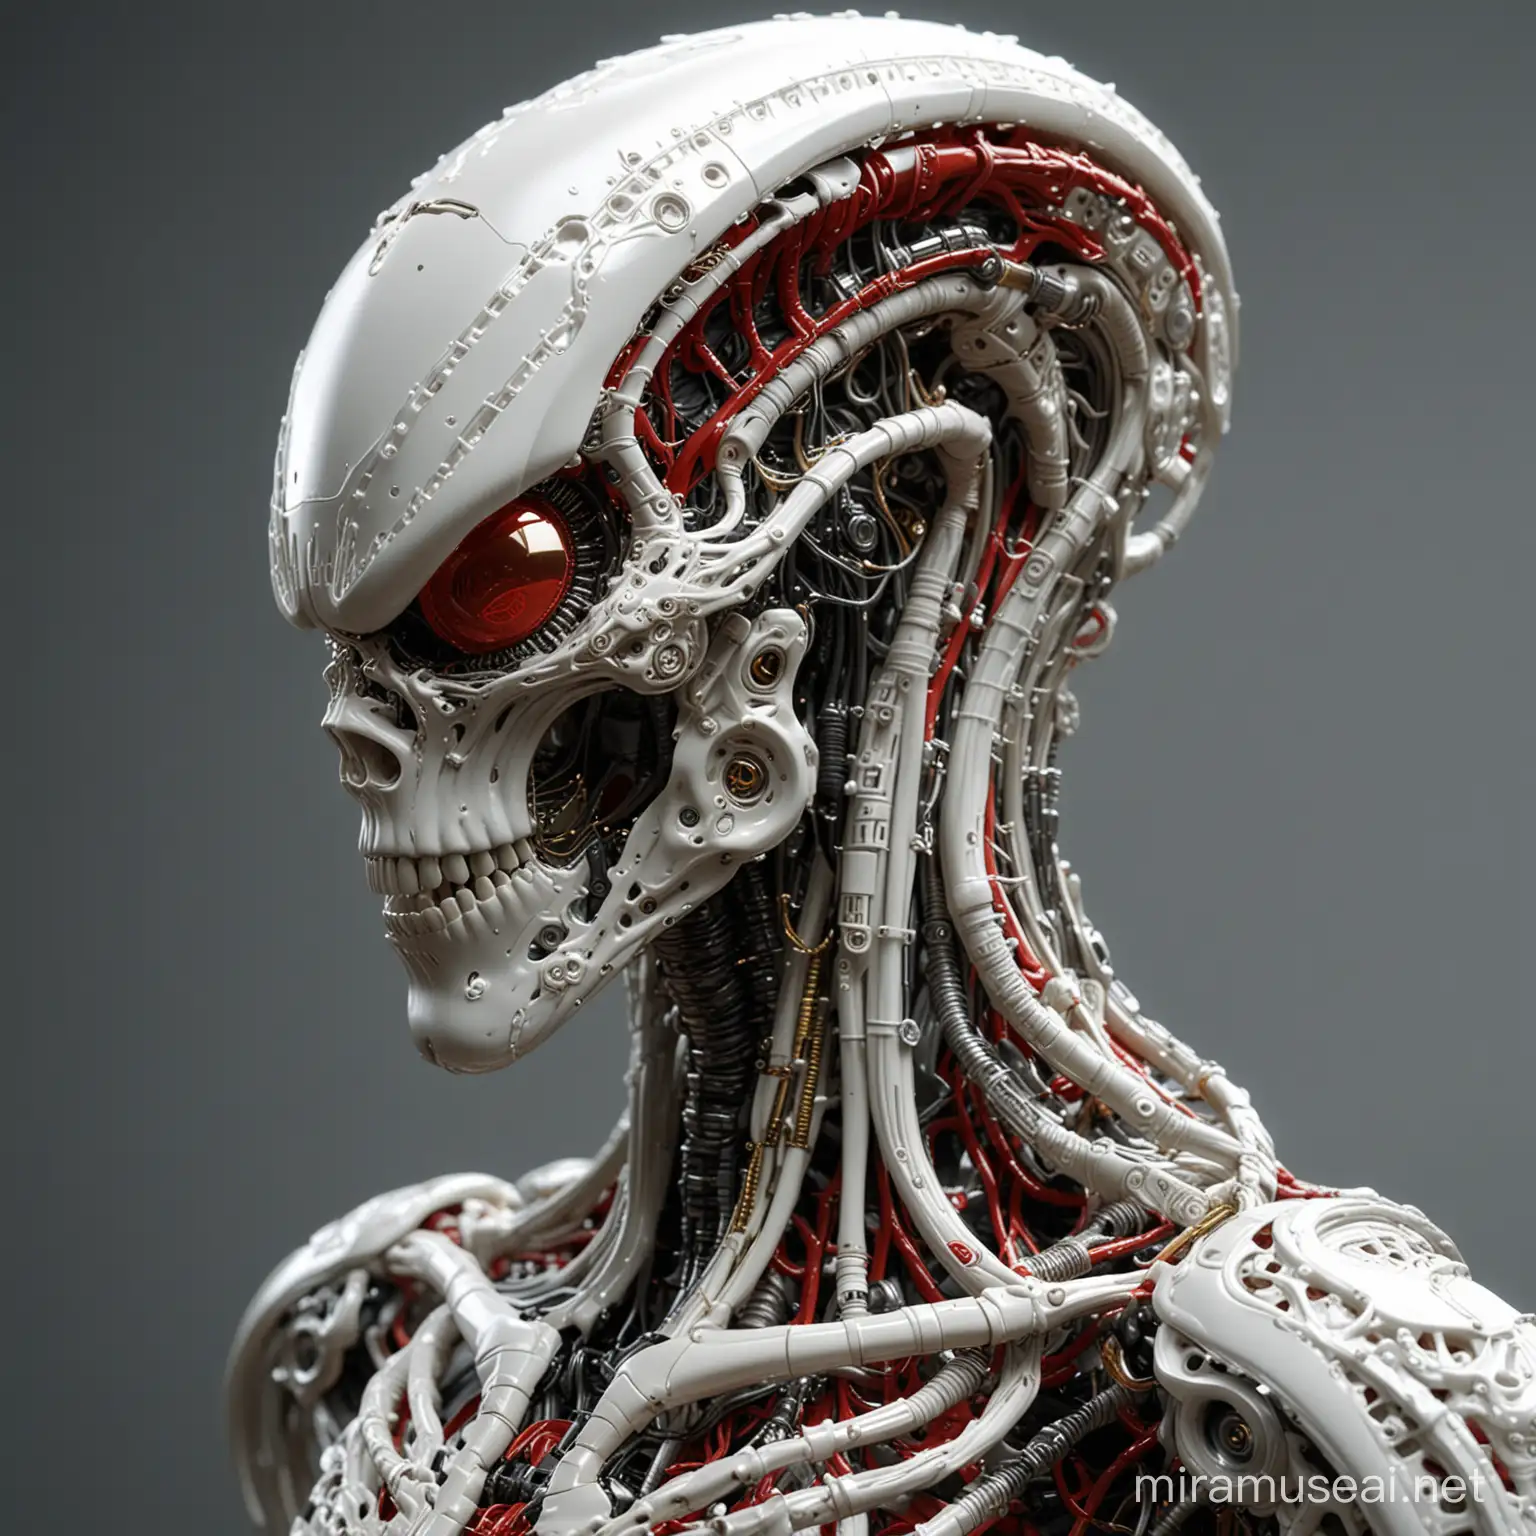 complex 3D rendering hyper detailed ultra sharp beautiful porcelain xenomorph profile mechanical cyborg 1 5 0 mm beautiful rich natural soft light edge light studio light stems wavy roots scary teeth, red, fleshy-around- teeth, no eyes head back elongated, fine leaf lace, silver gold filigree details, alexander mcqueen high fashion haute couture, art nouveau fashion embroidered, steampunk, mesh wire, hyperrealistic, mandelbrot fractal, anatomical, eyeless, white metal armor, facial muscles, cable wires, microchip, elegant , acetate design, v.r. giger style, 8 k